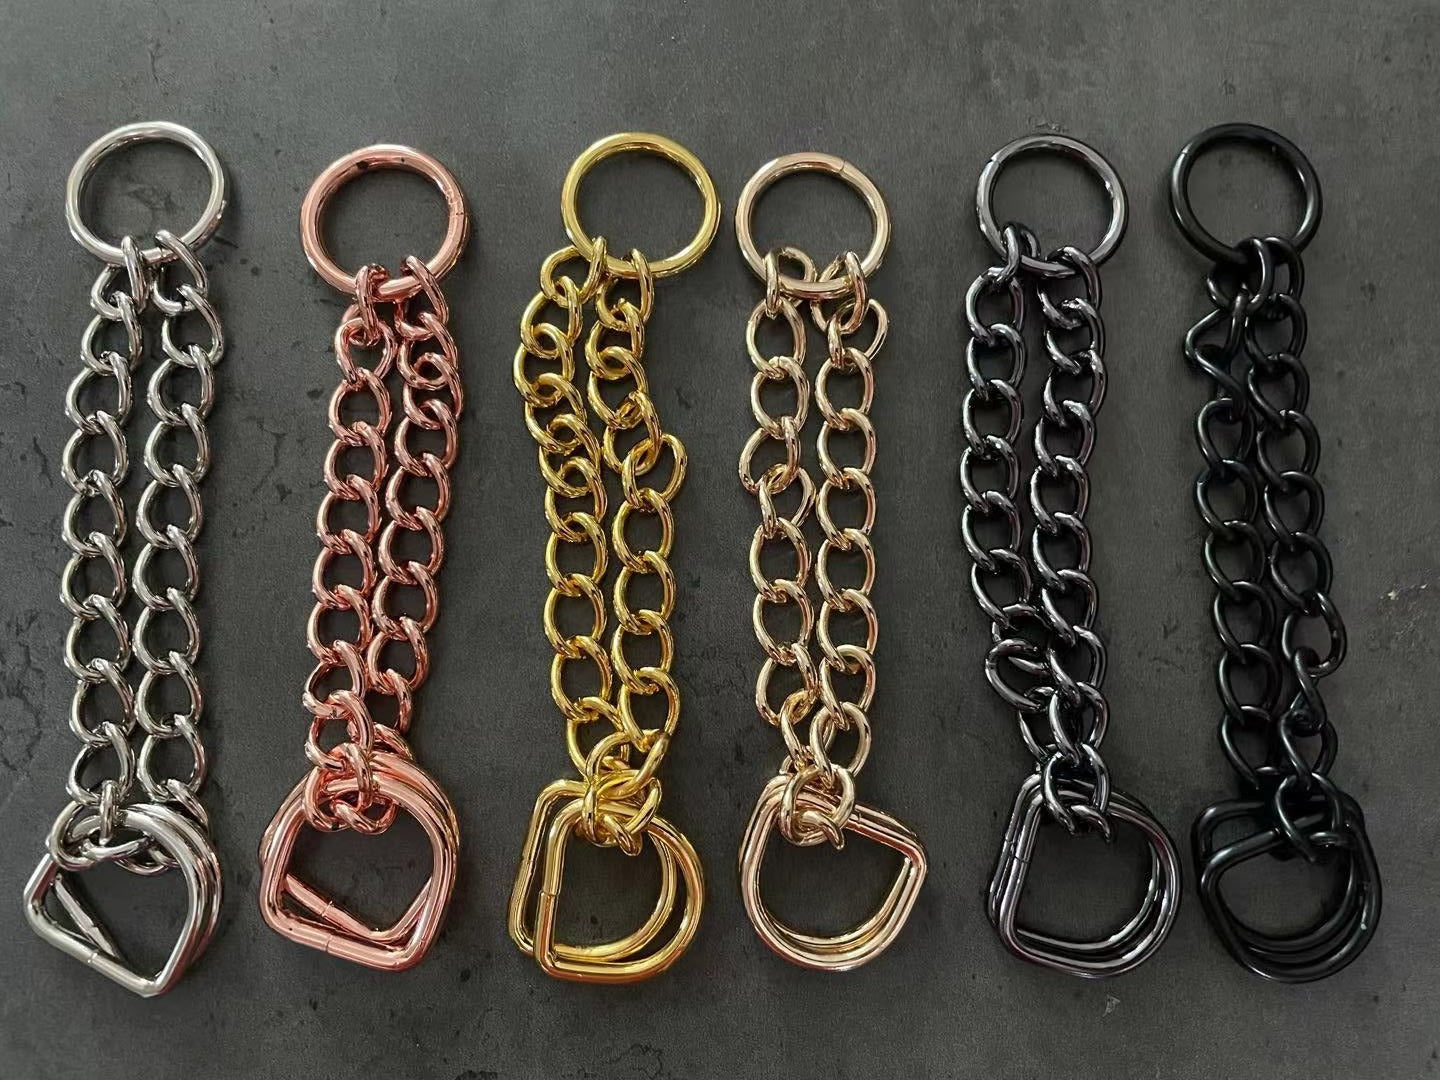 3/4'' (20mm) Martingale Collar hardware sets, weld chain & rings - 6 Colors